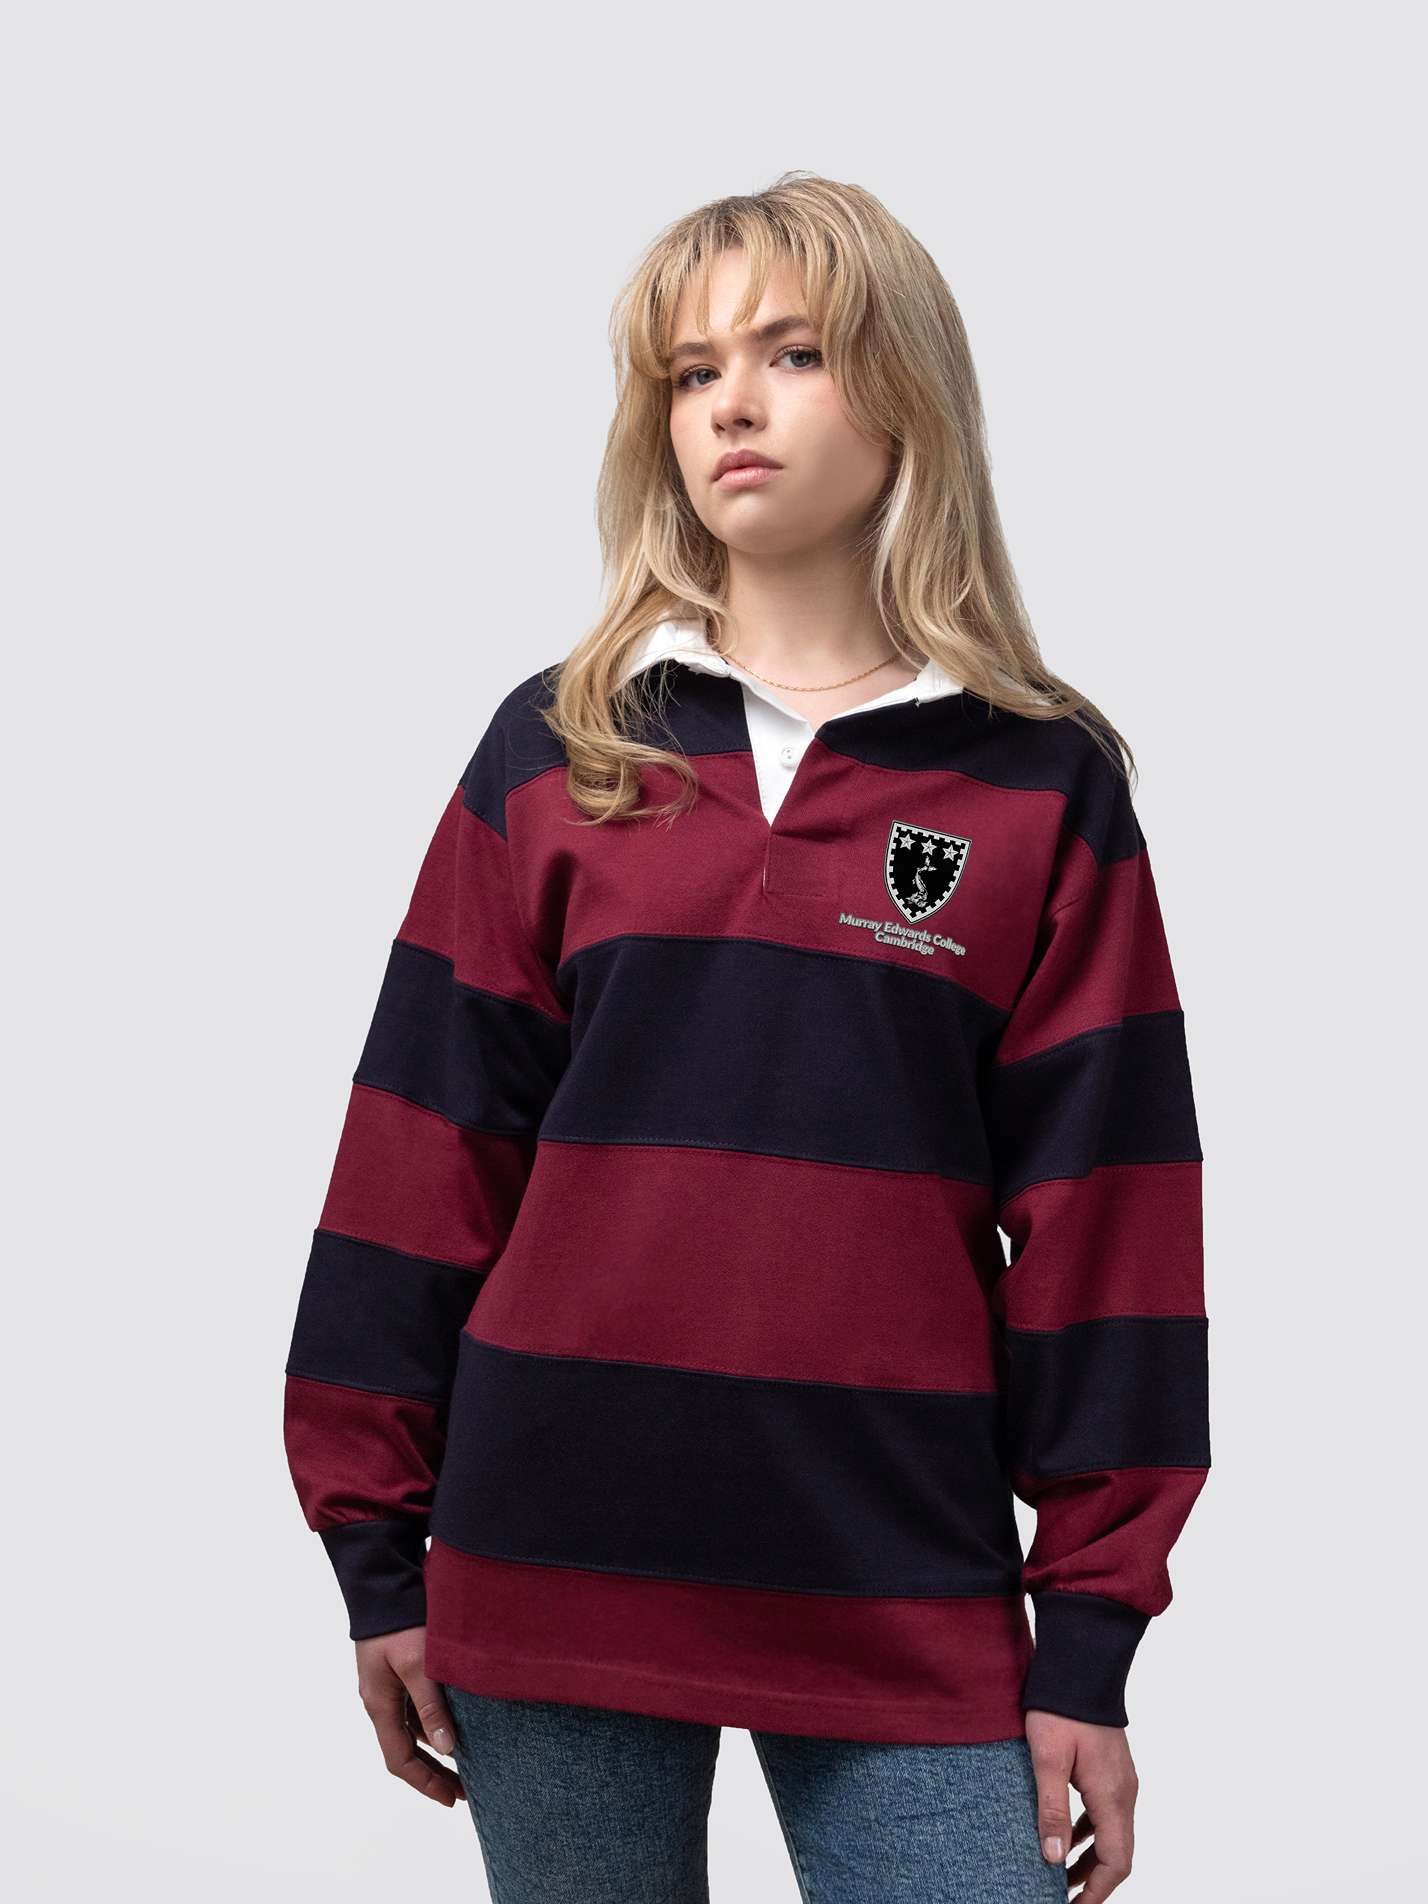 Murray Edwards College rugby shirt, with burgundy and navy stripes